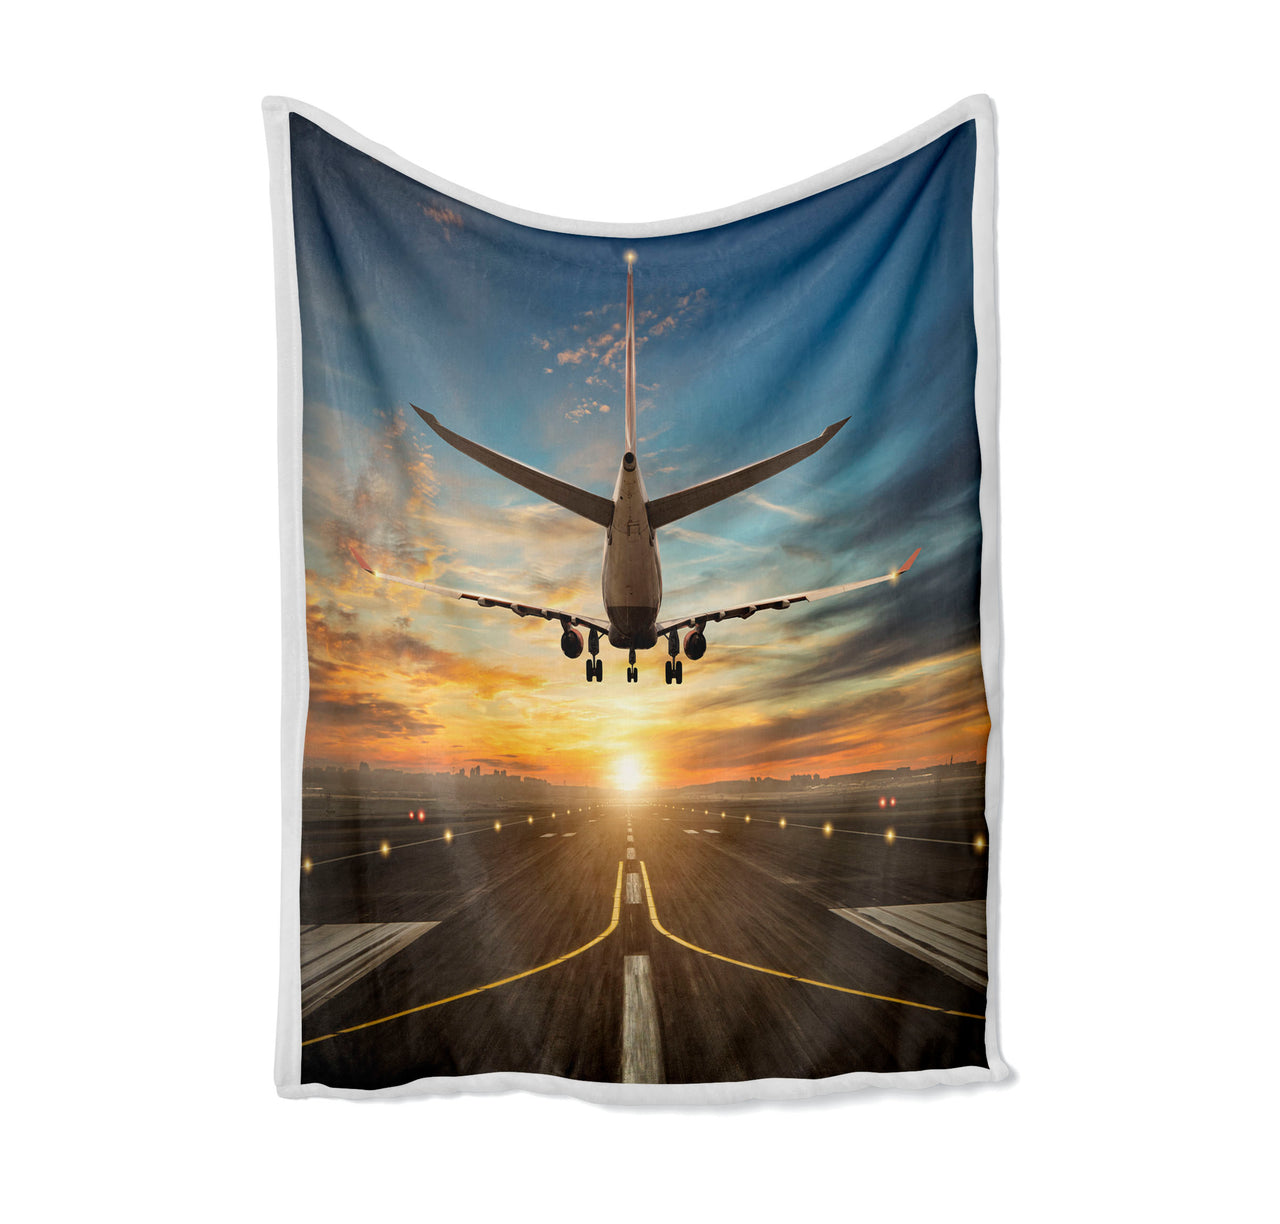 Airplane over Runway Towards the Sunrise Designed Bed Blankets & Covers